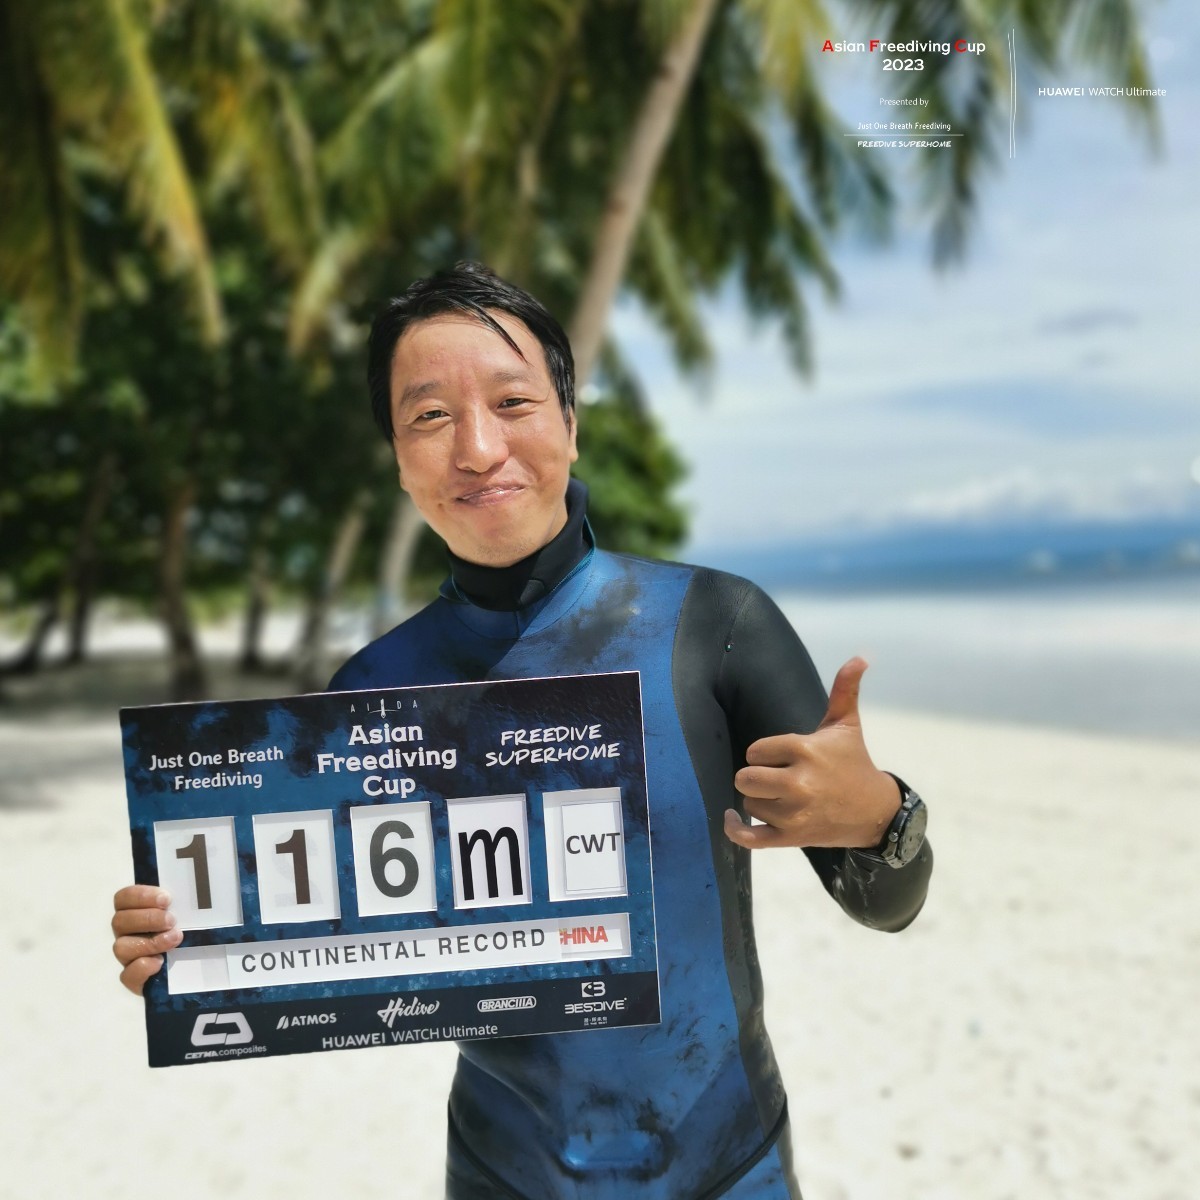 With a dive of CWT 116m and FIM 109m, Wang Jin (Sendoh) broke two continental records at the Asian Freediving Cup 2023, wearing #HUAWEIWATCHUltimate and ranking 1st in overall scoring! Congrats Sendoh! 

#freediving